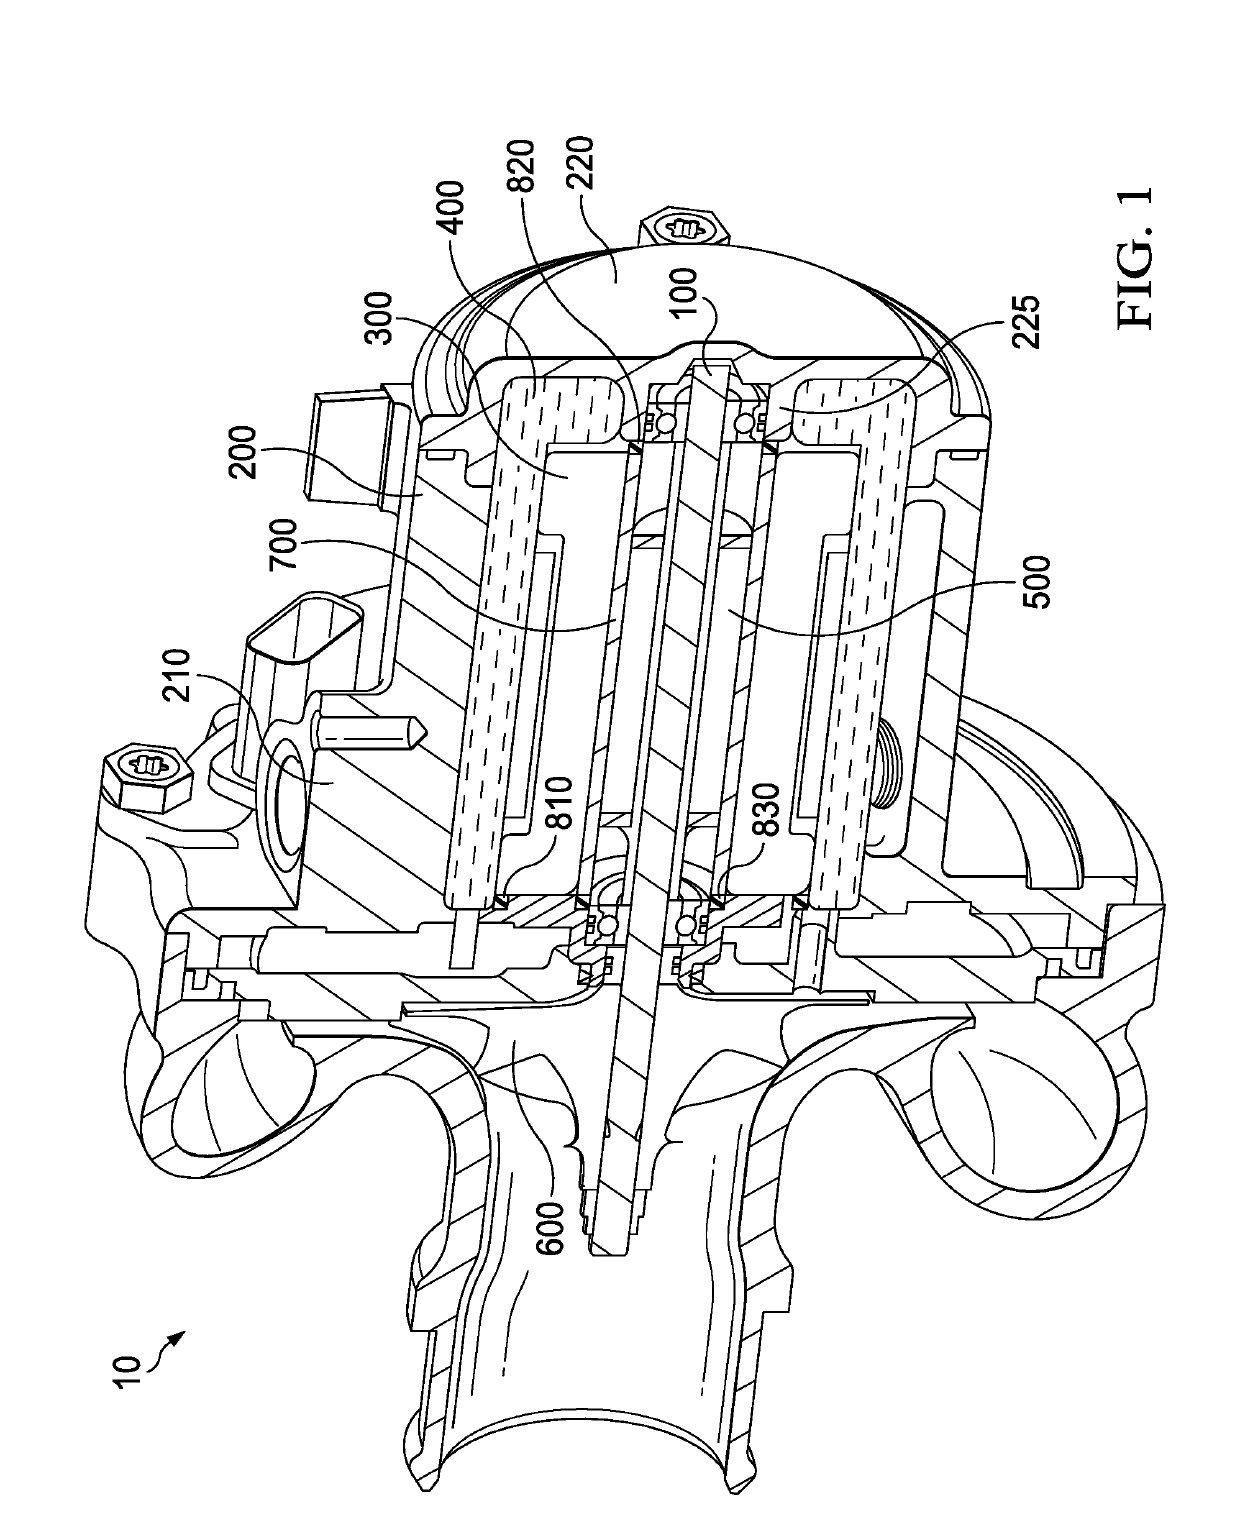 Electric charging device with fluid cooling